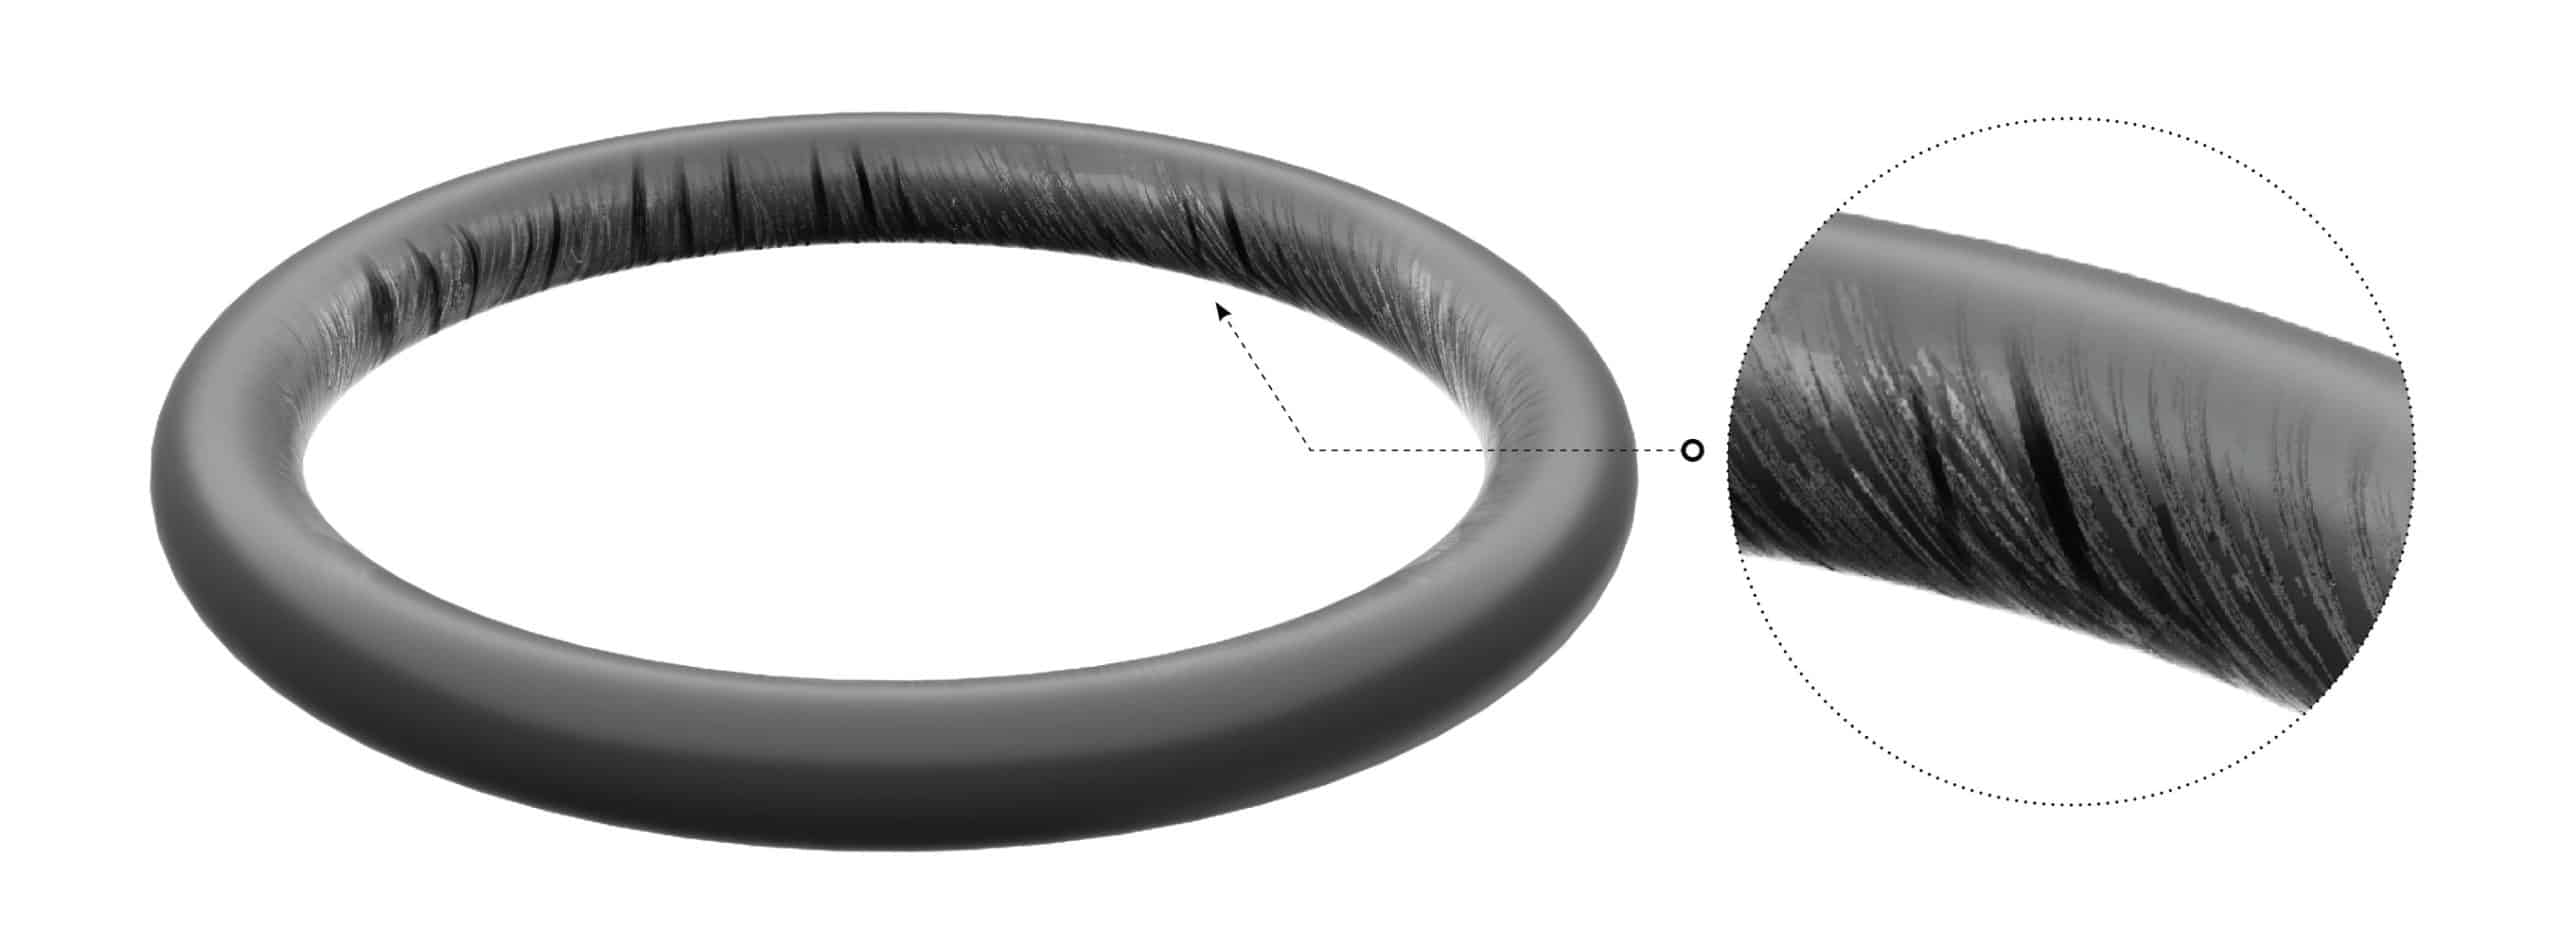 Causes for O-Ring Failure | Global O-Ring and Seal